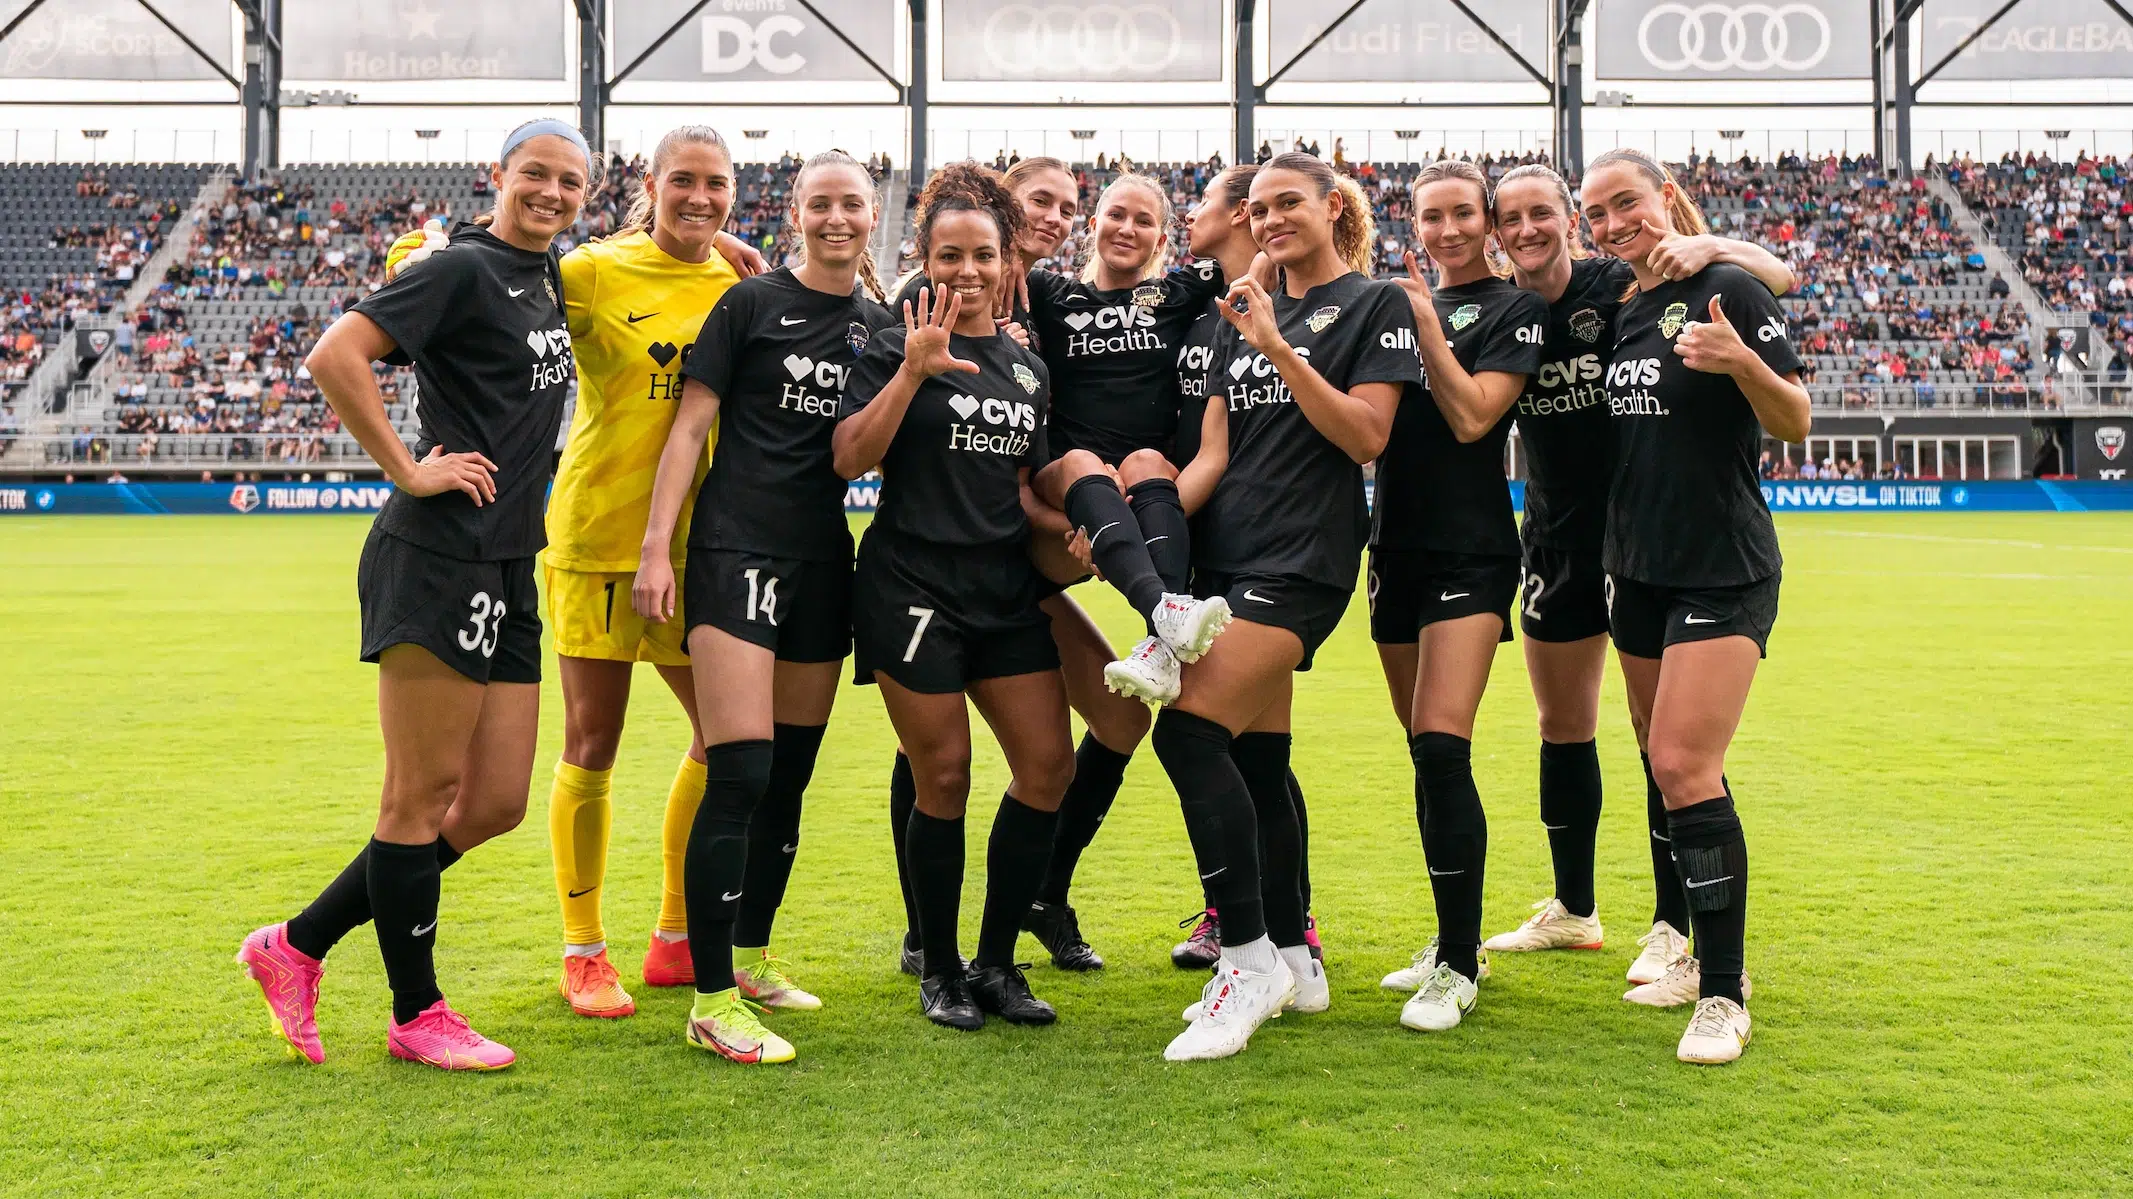 Ashley Sanchez is held up by two of her teammates as seven others circle around and hold up the number 50 in celebration of her 50th cap. Ten of the players are in black uniforms and one is in a yellow goalie uniform.